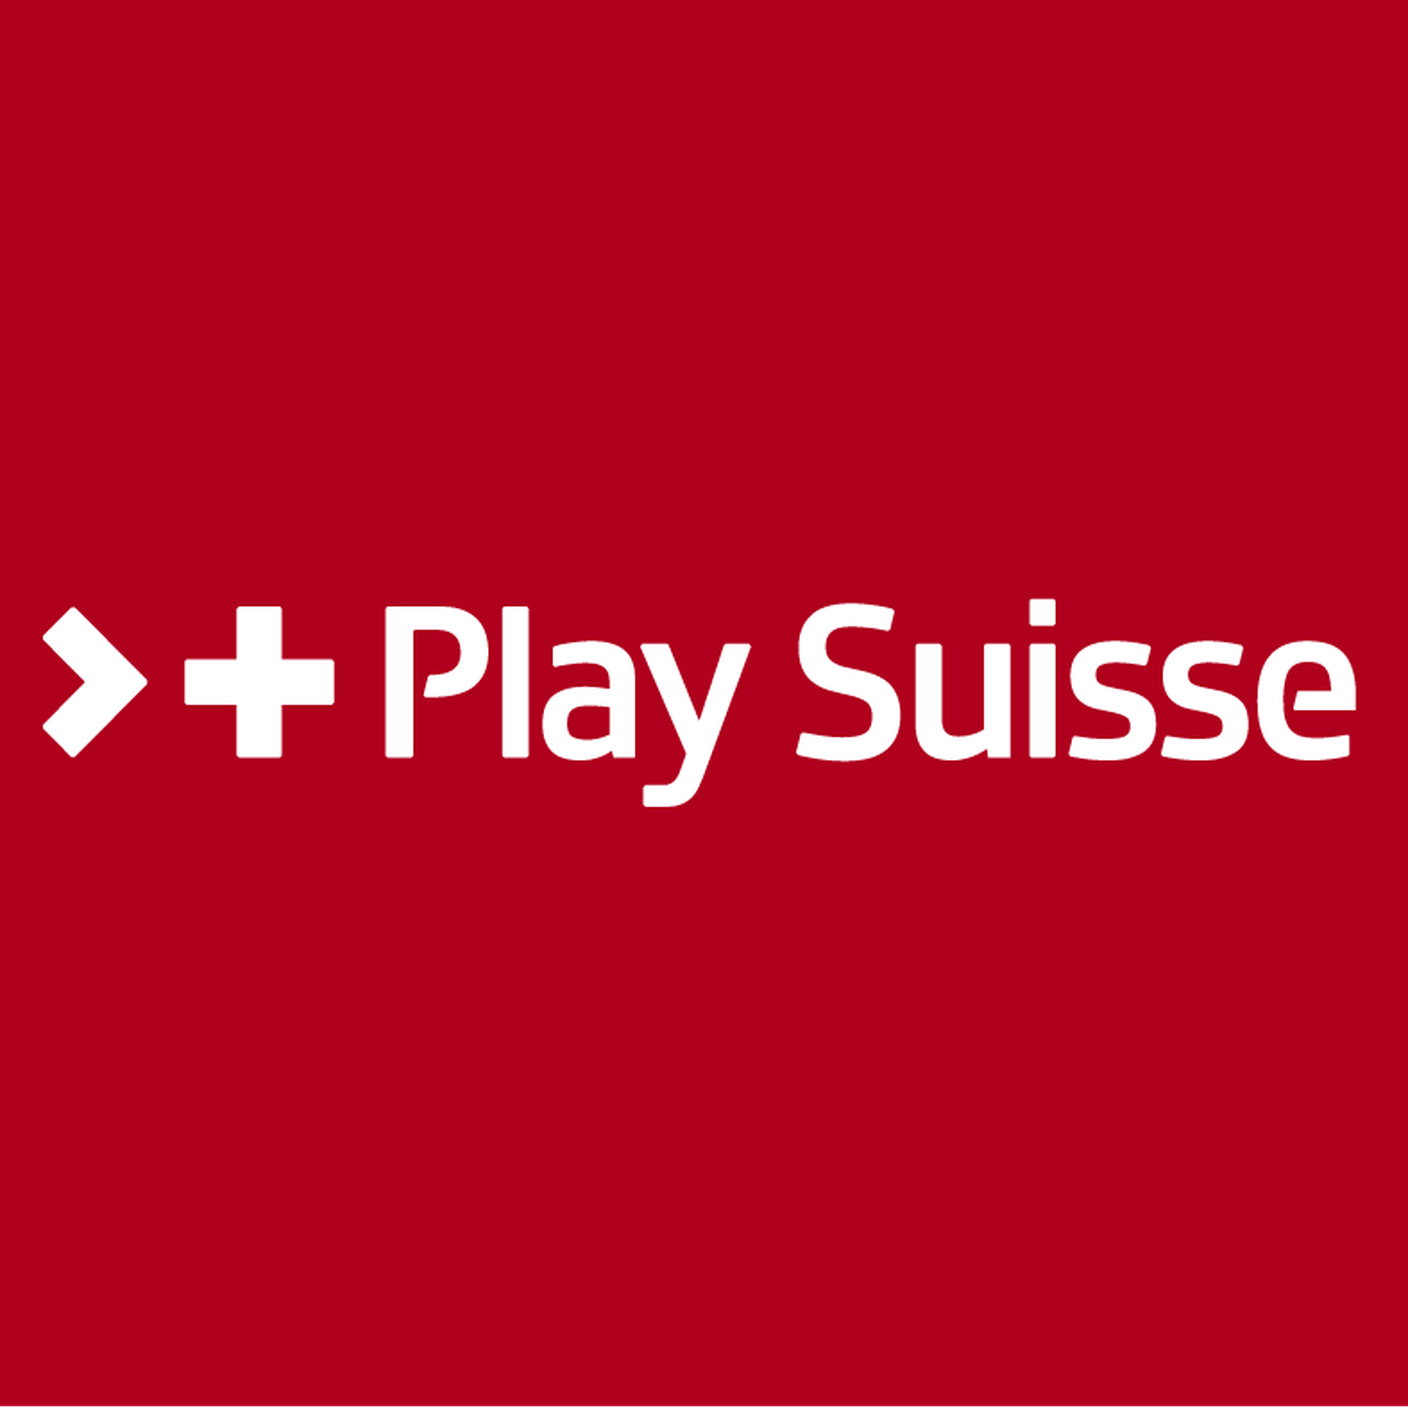 Play_Suisse_Logo_SRG Red.png